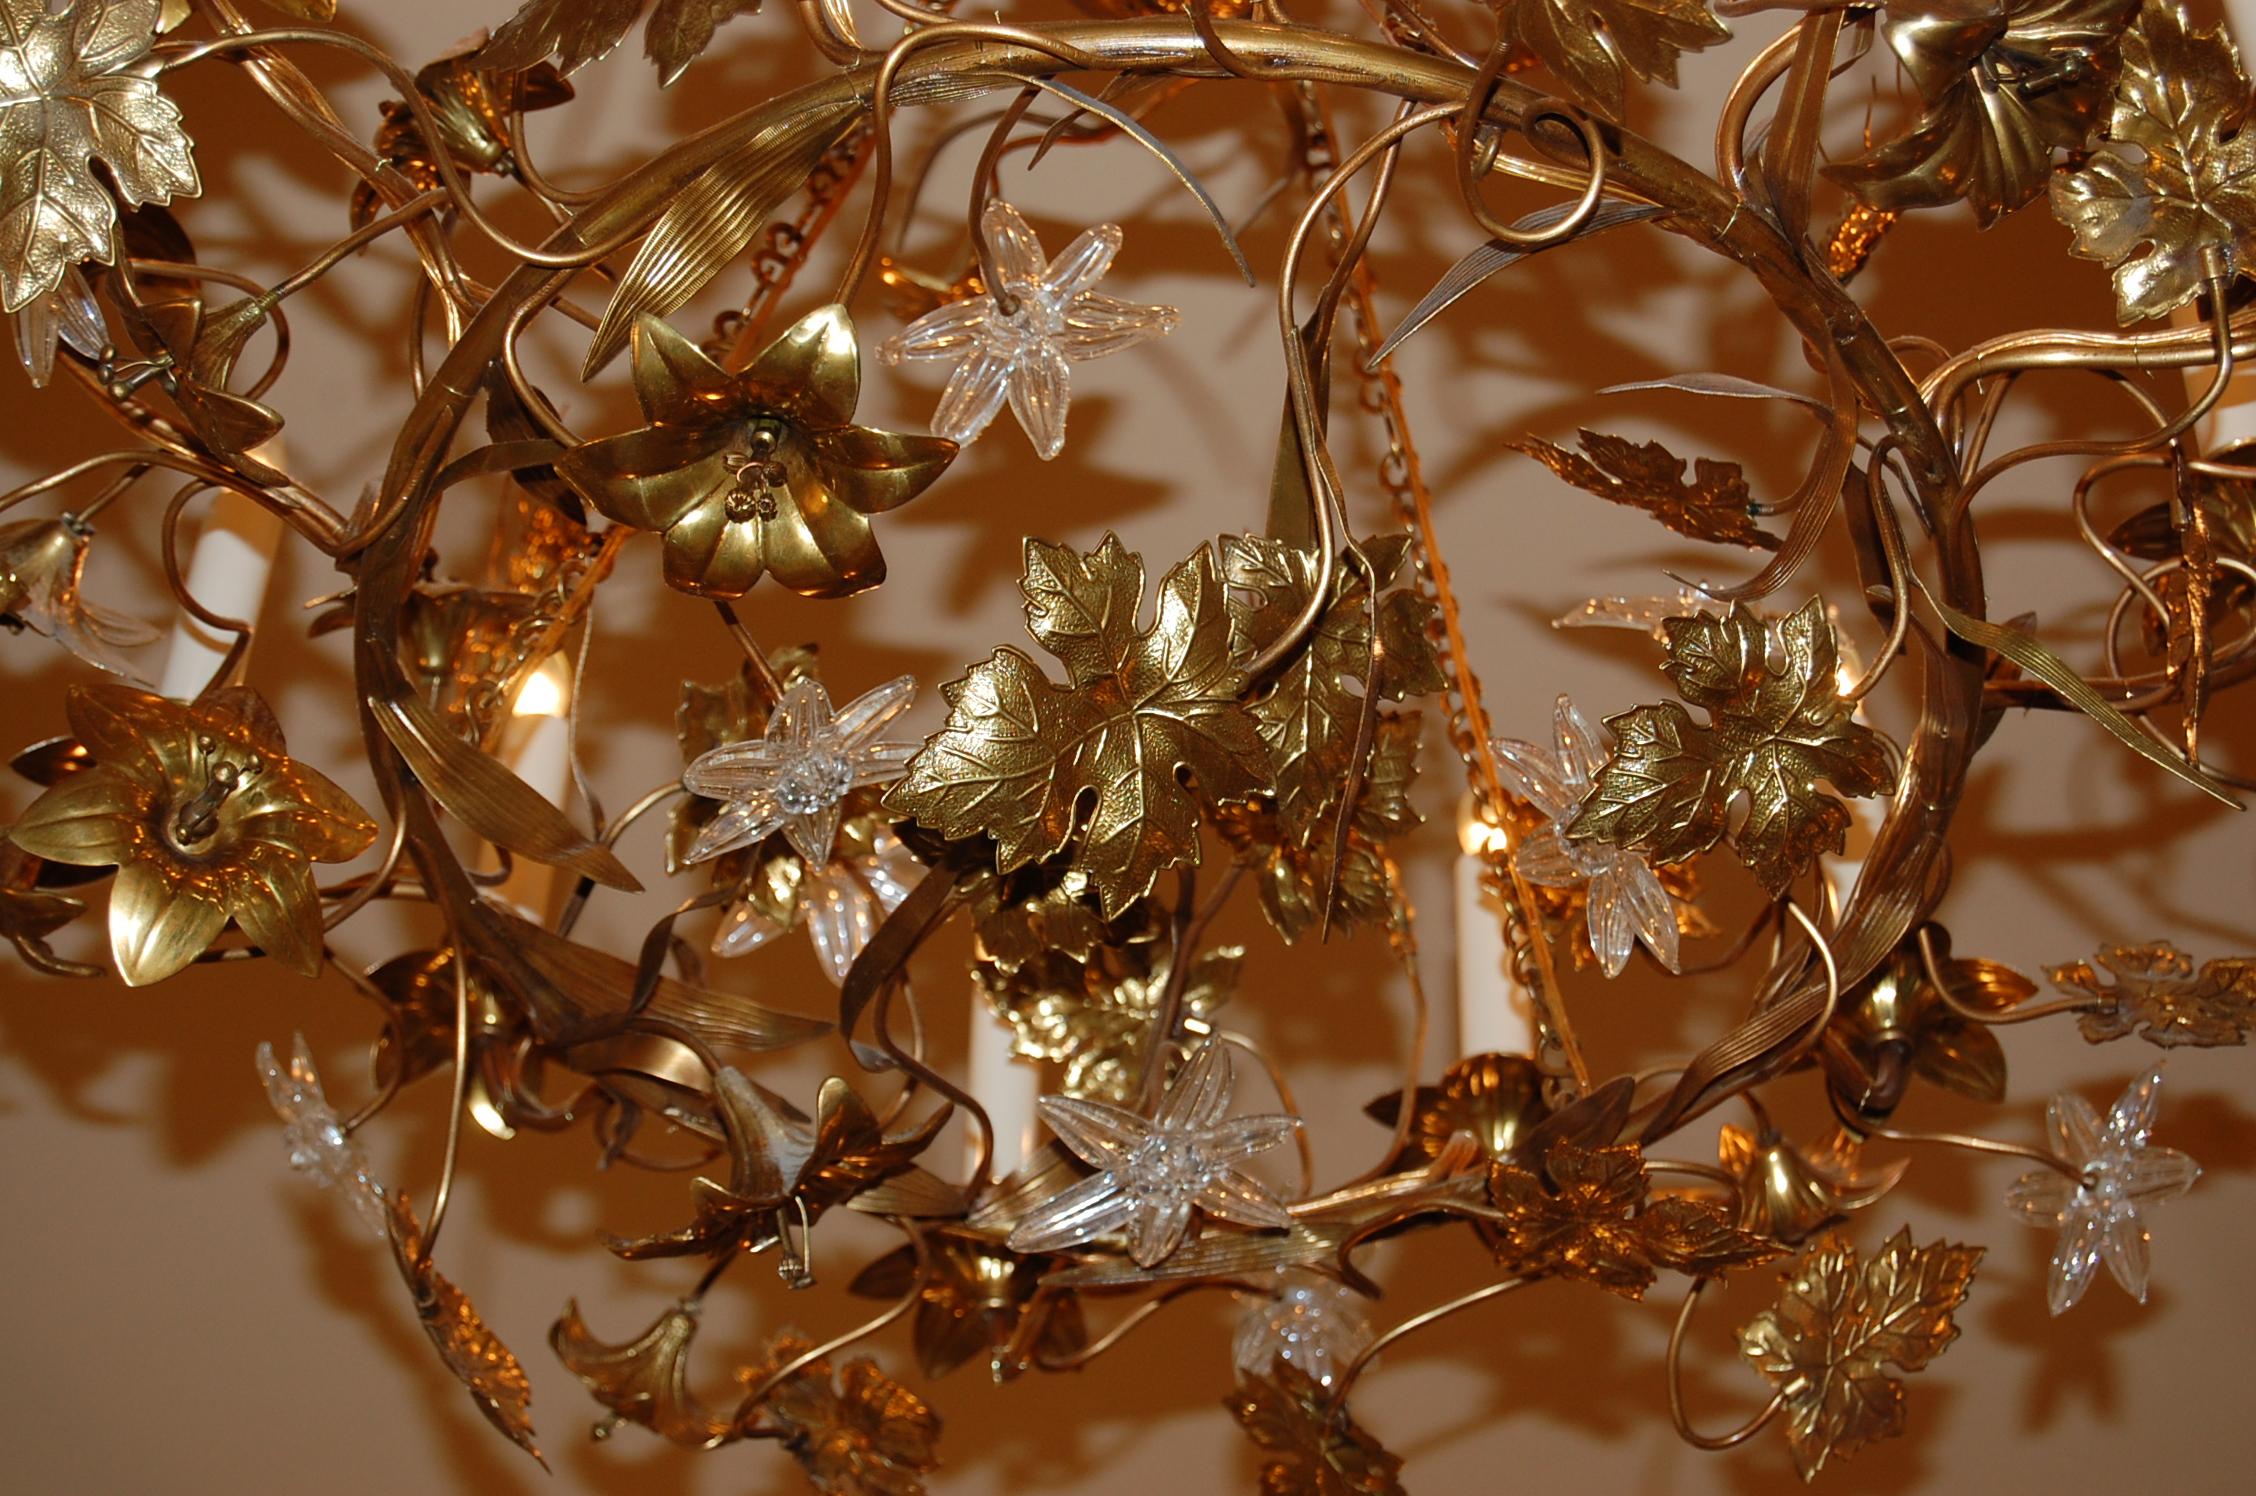 Gilt Brass Chandelier with Clusters of Brass Grapes, Leaves and Sheaths of Wheat 9